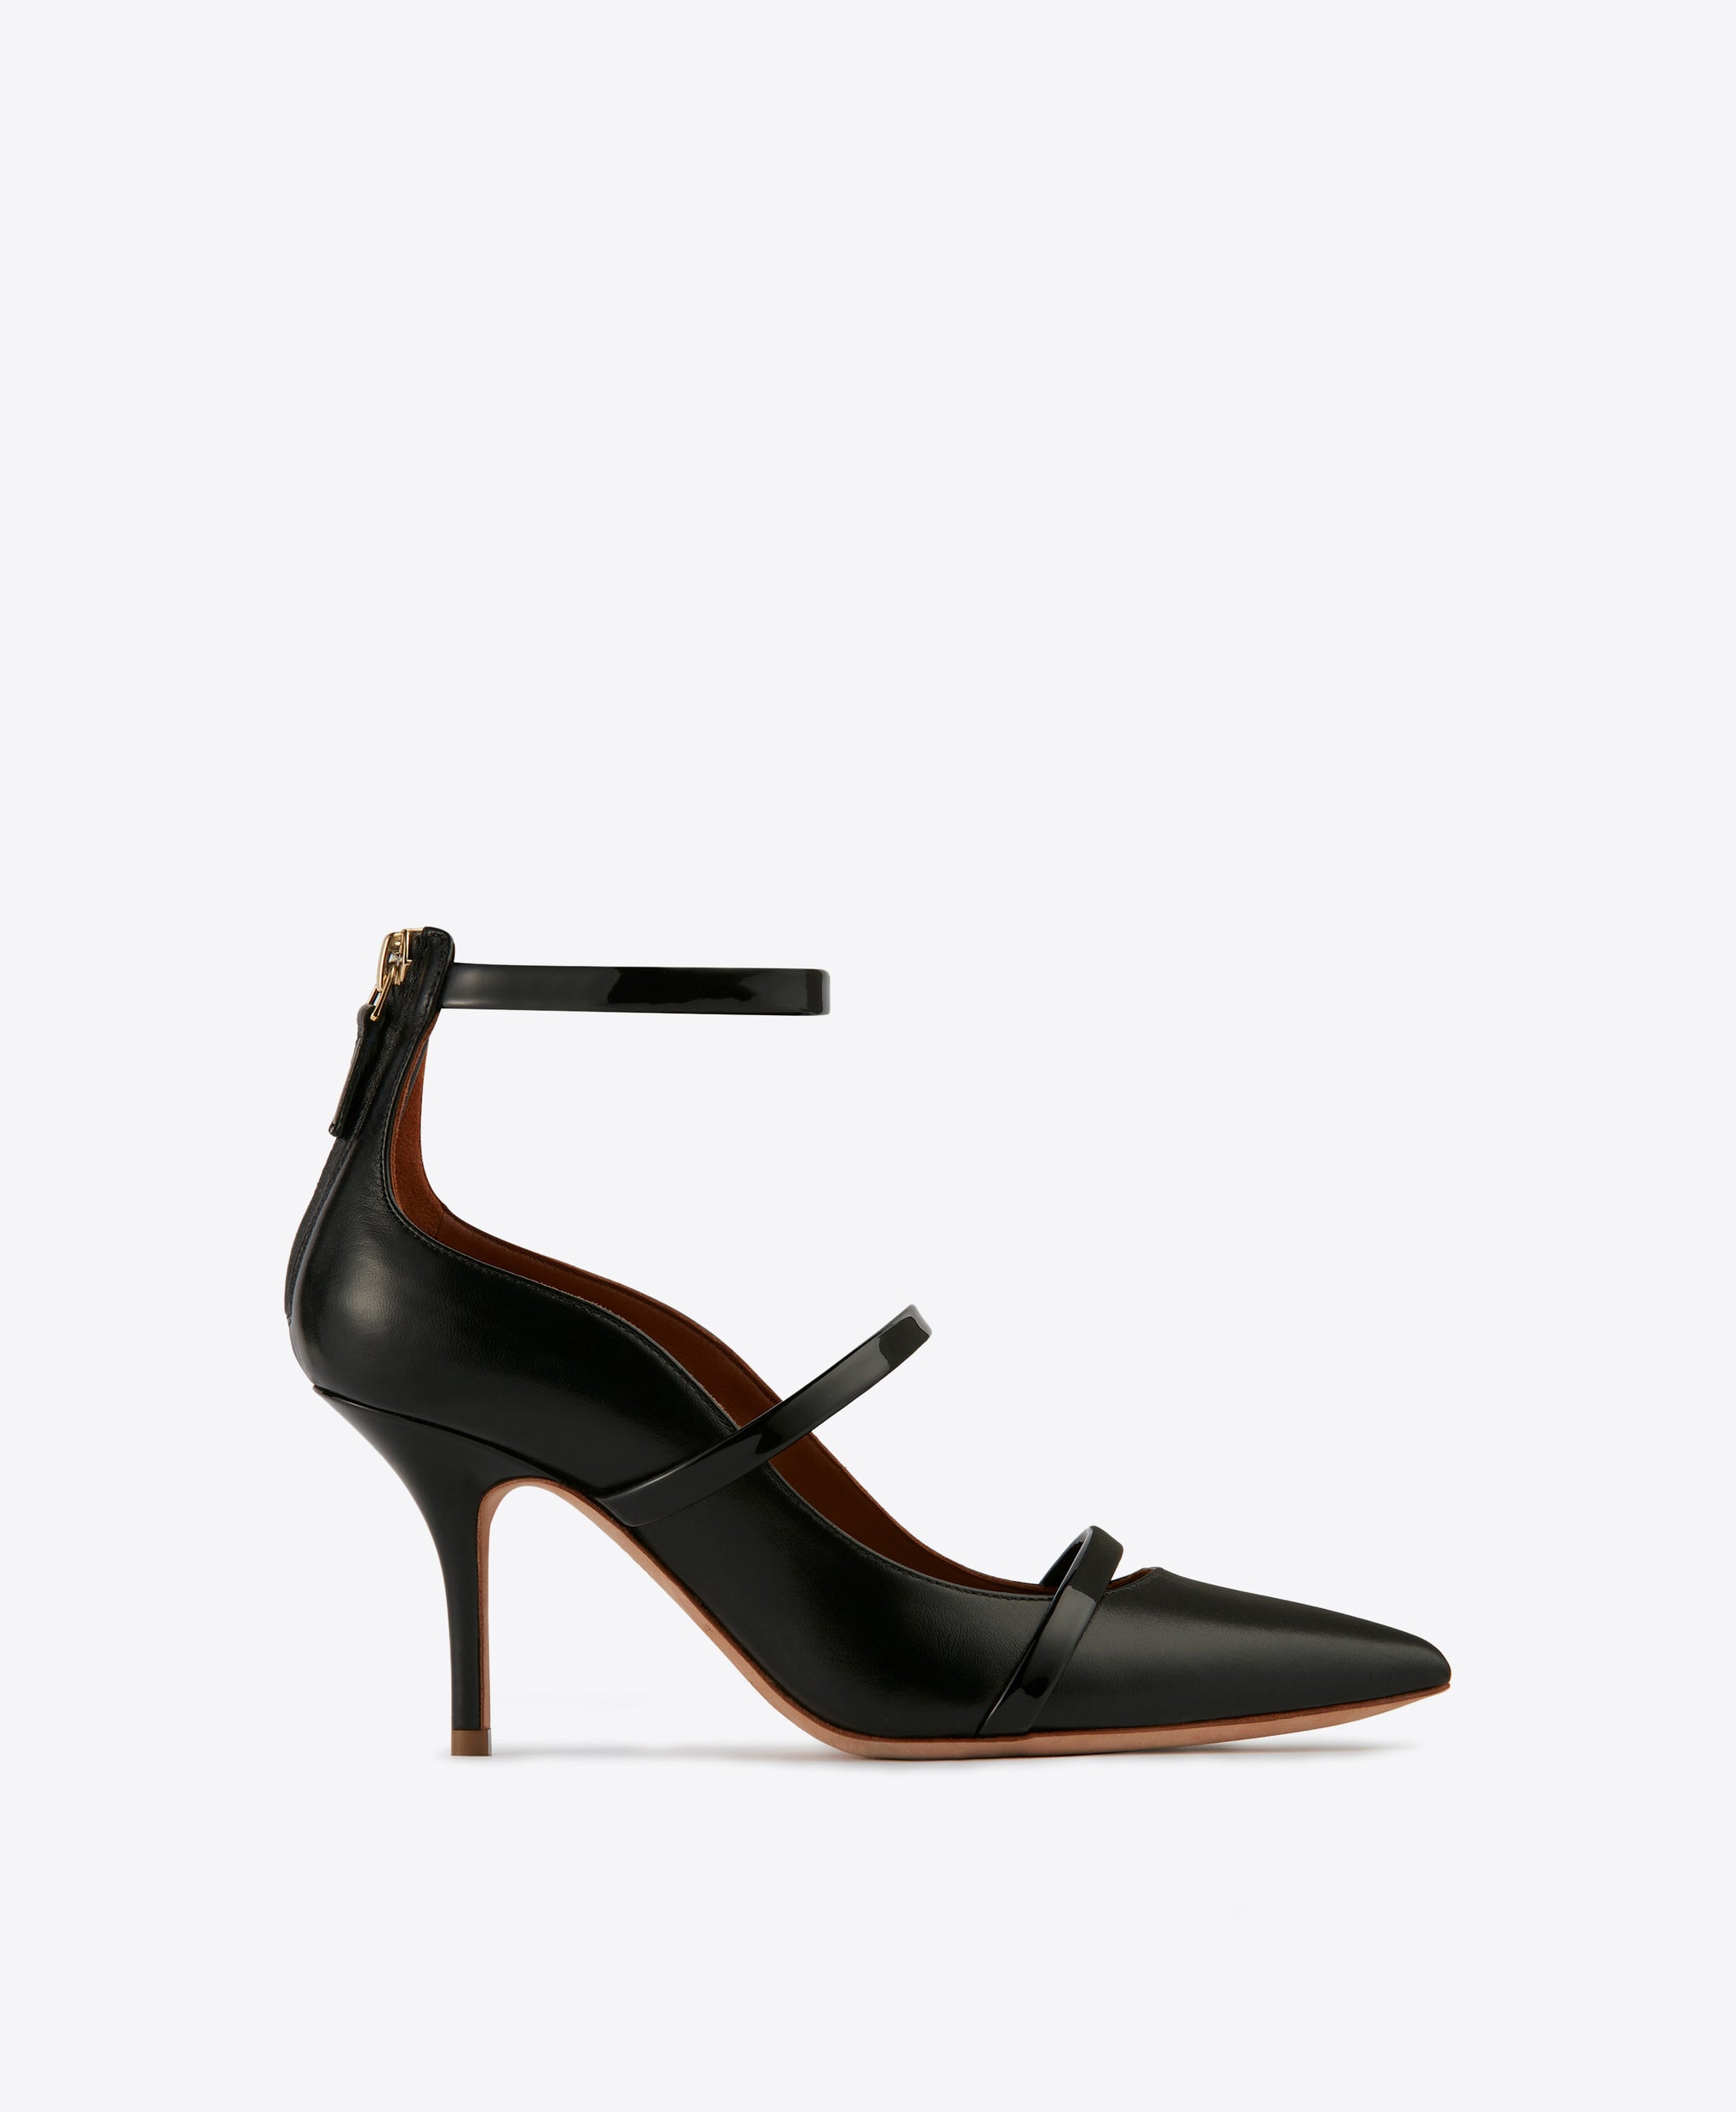 Women's Black Leather Pumps with Heel and Pointed Toe Malone Souliers